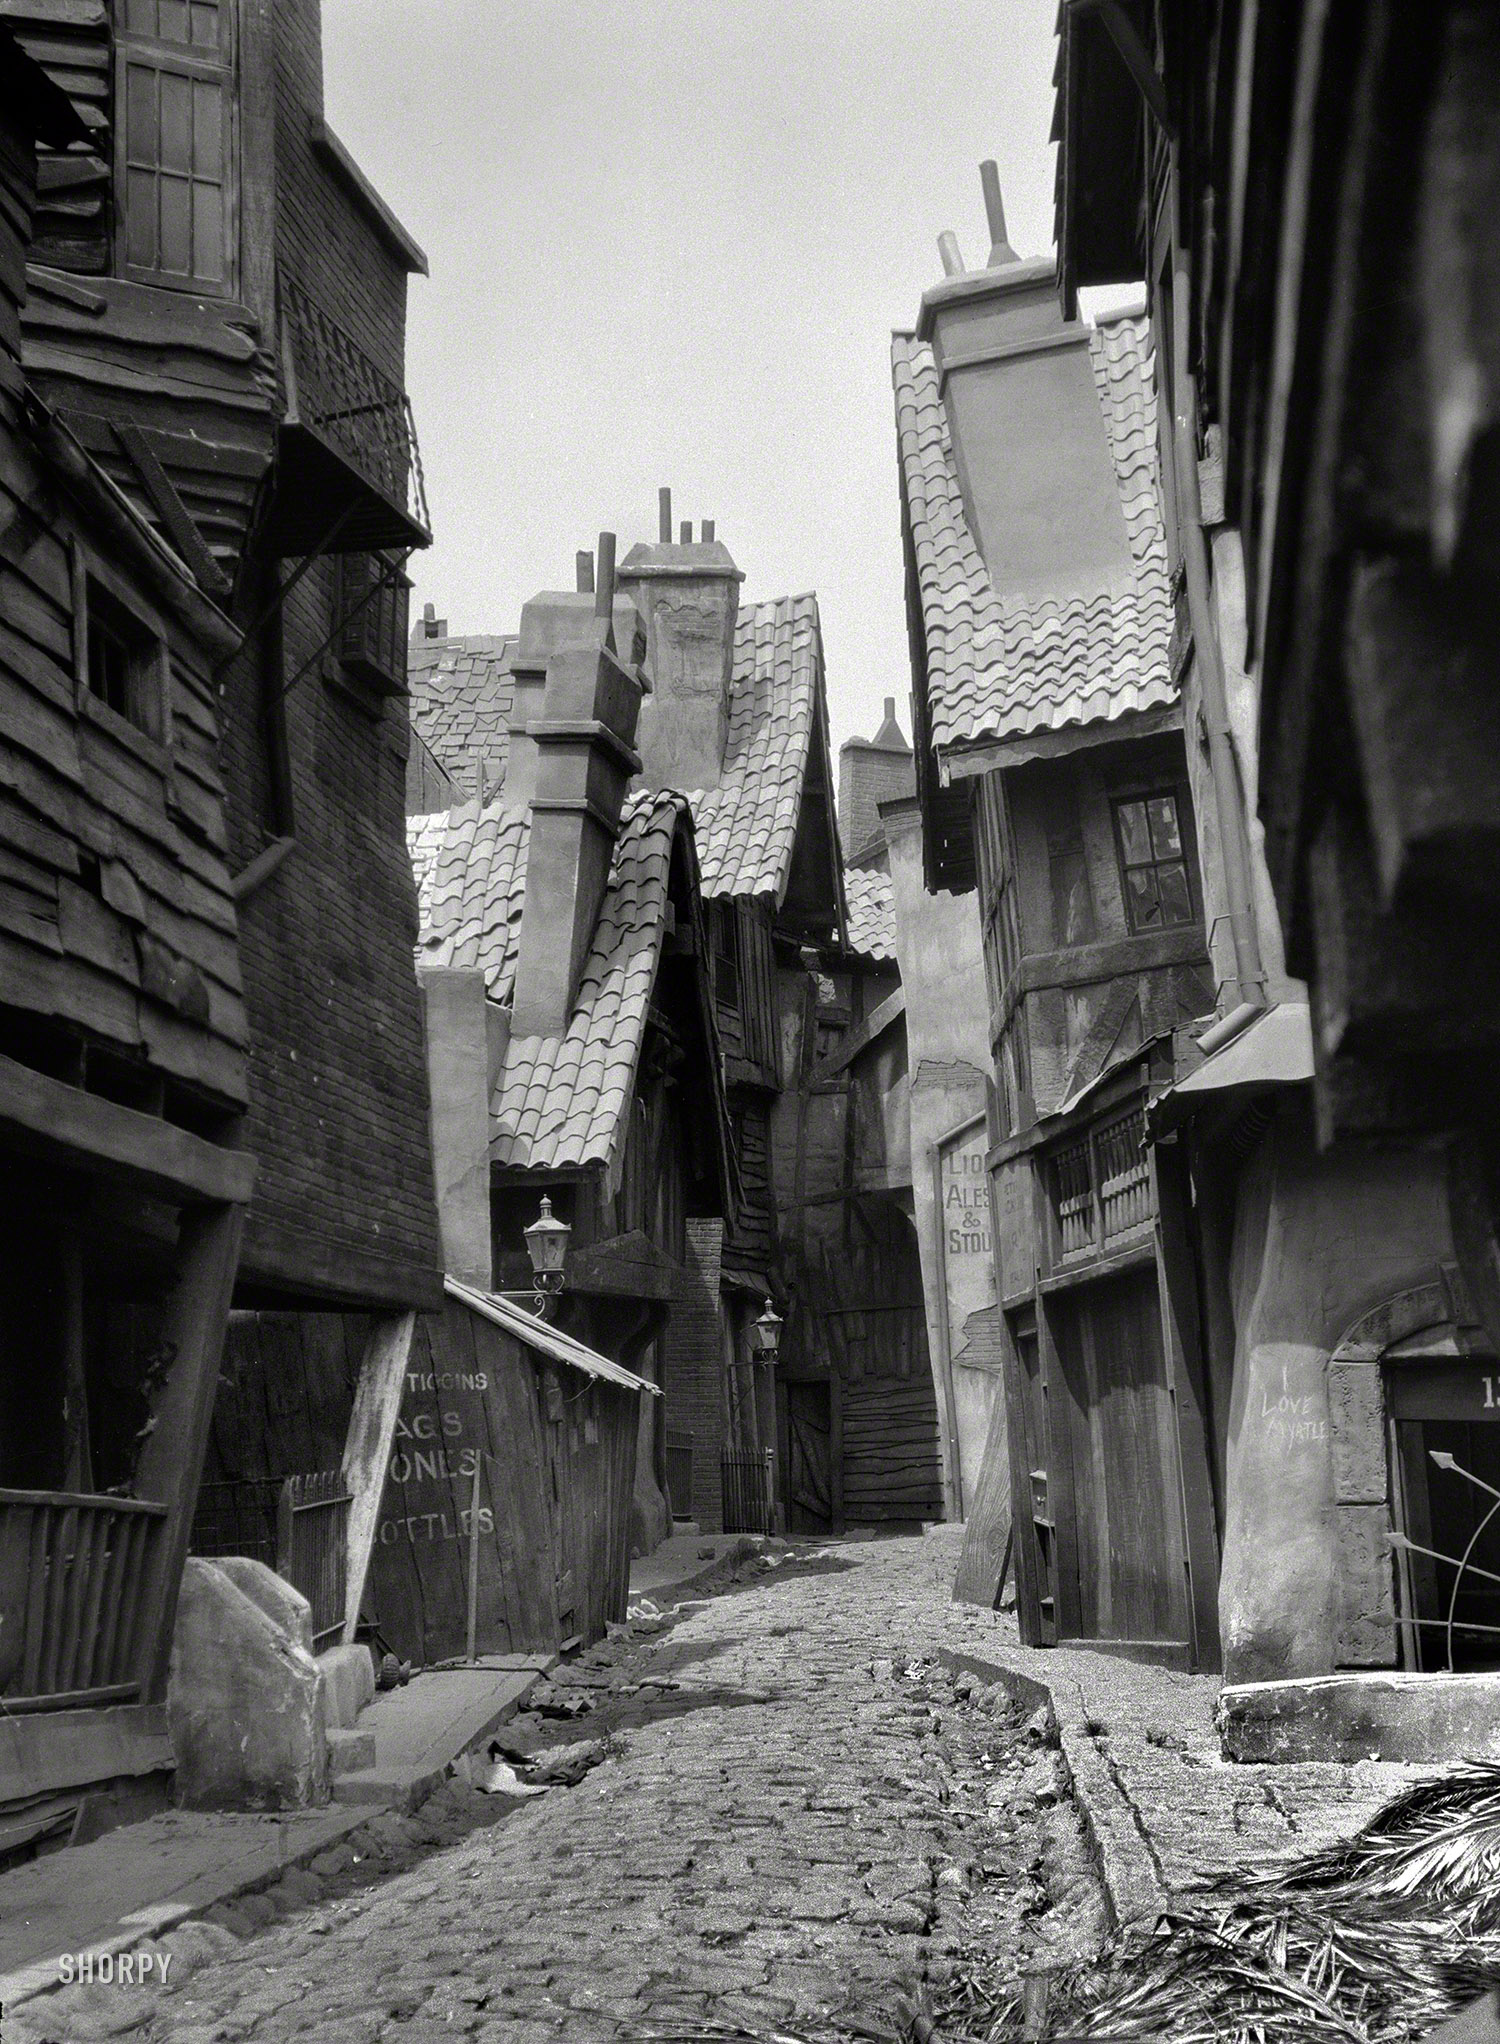 Circa 1920. "Unidentified buildings, possibly movie set, associated with Famous Players-Lasky." This seriously askew alleyway has a Dickensian-Disneyesque vibe. (Also: "I love Myrtle.") Nitrate negative by Arnold Genthe. View full size.